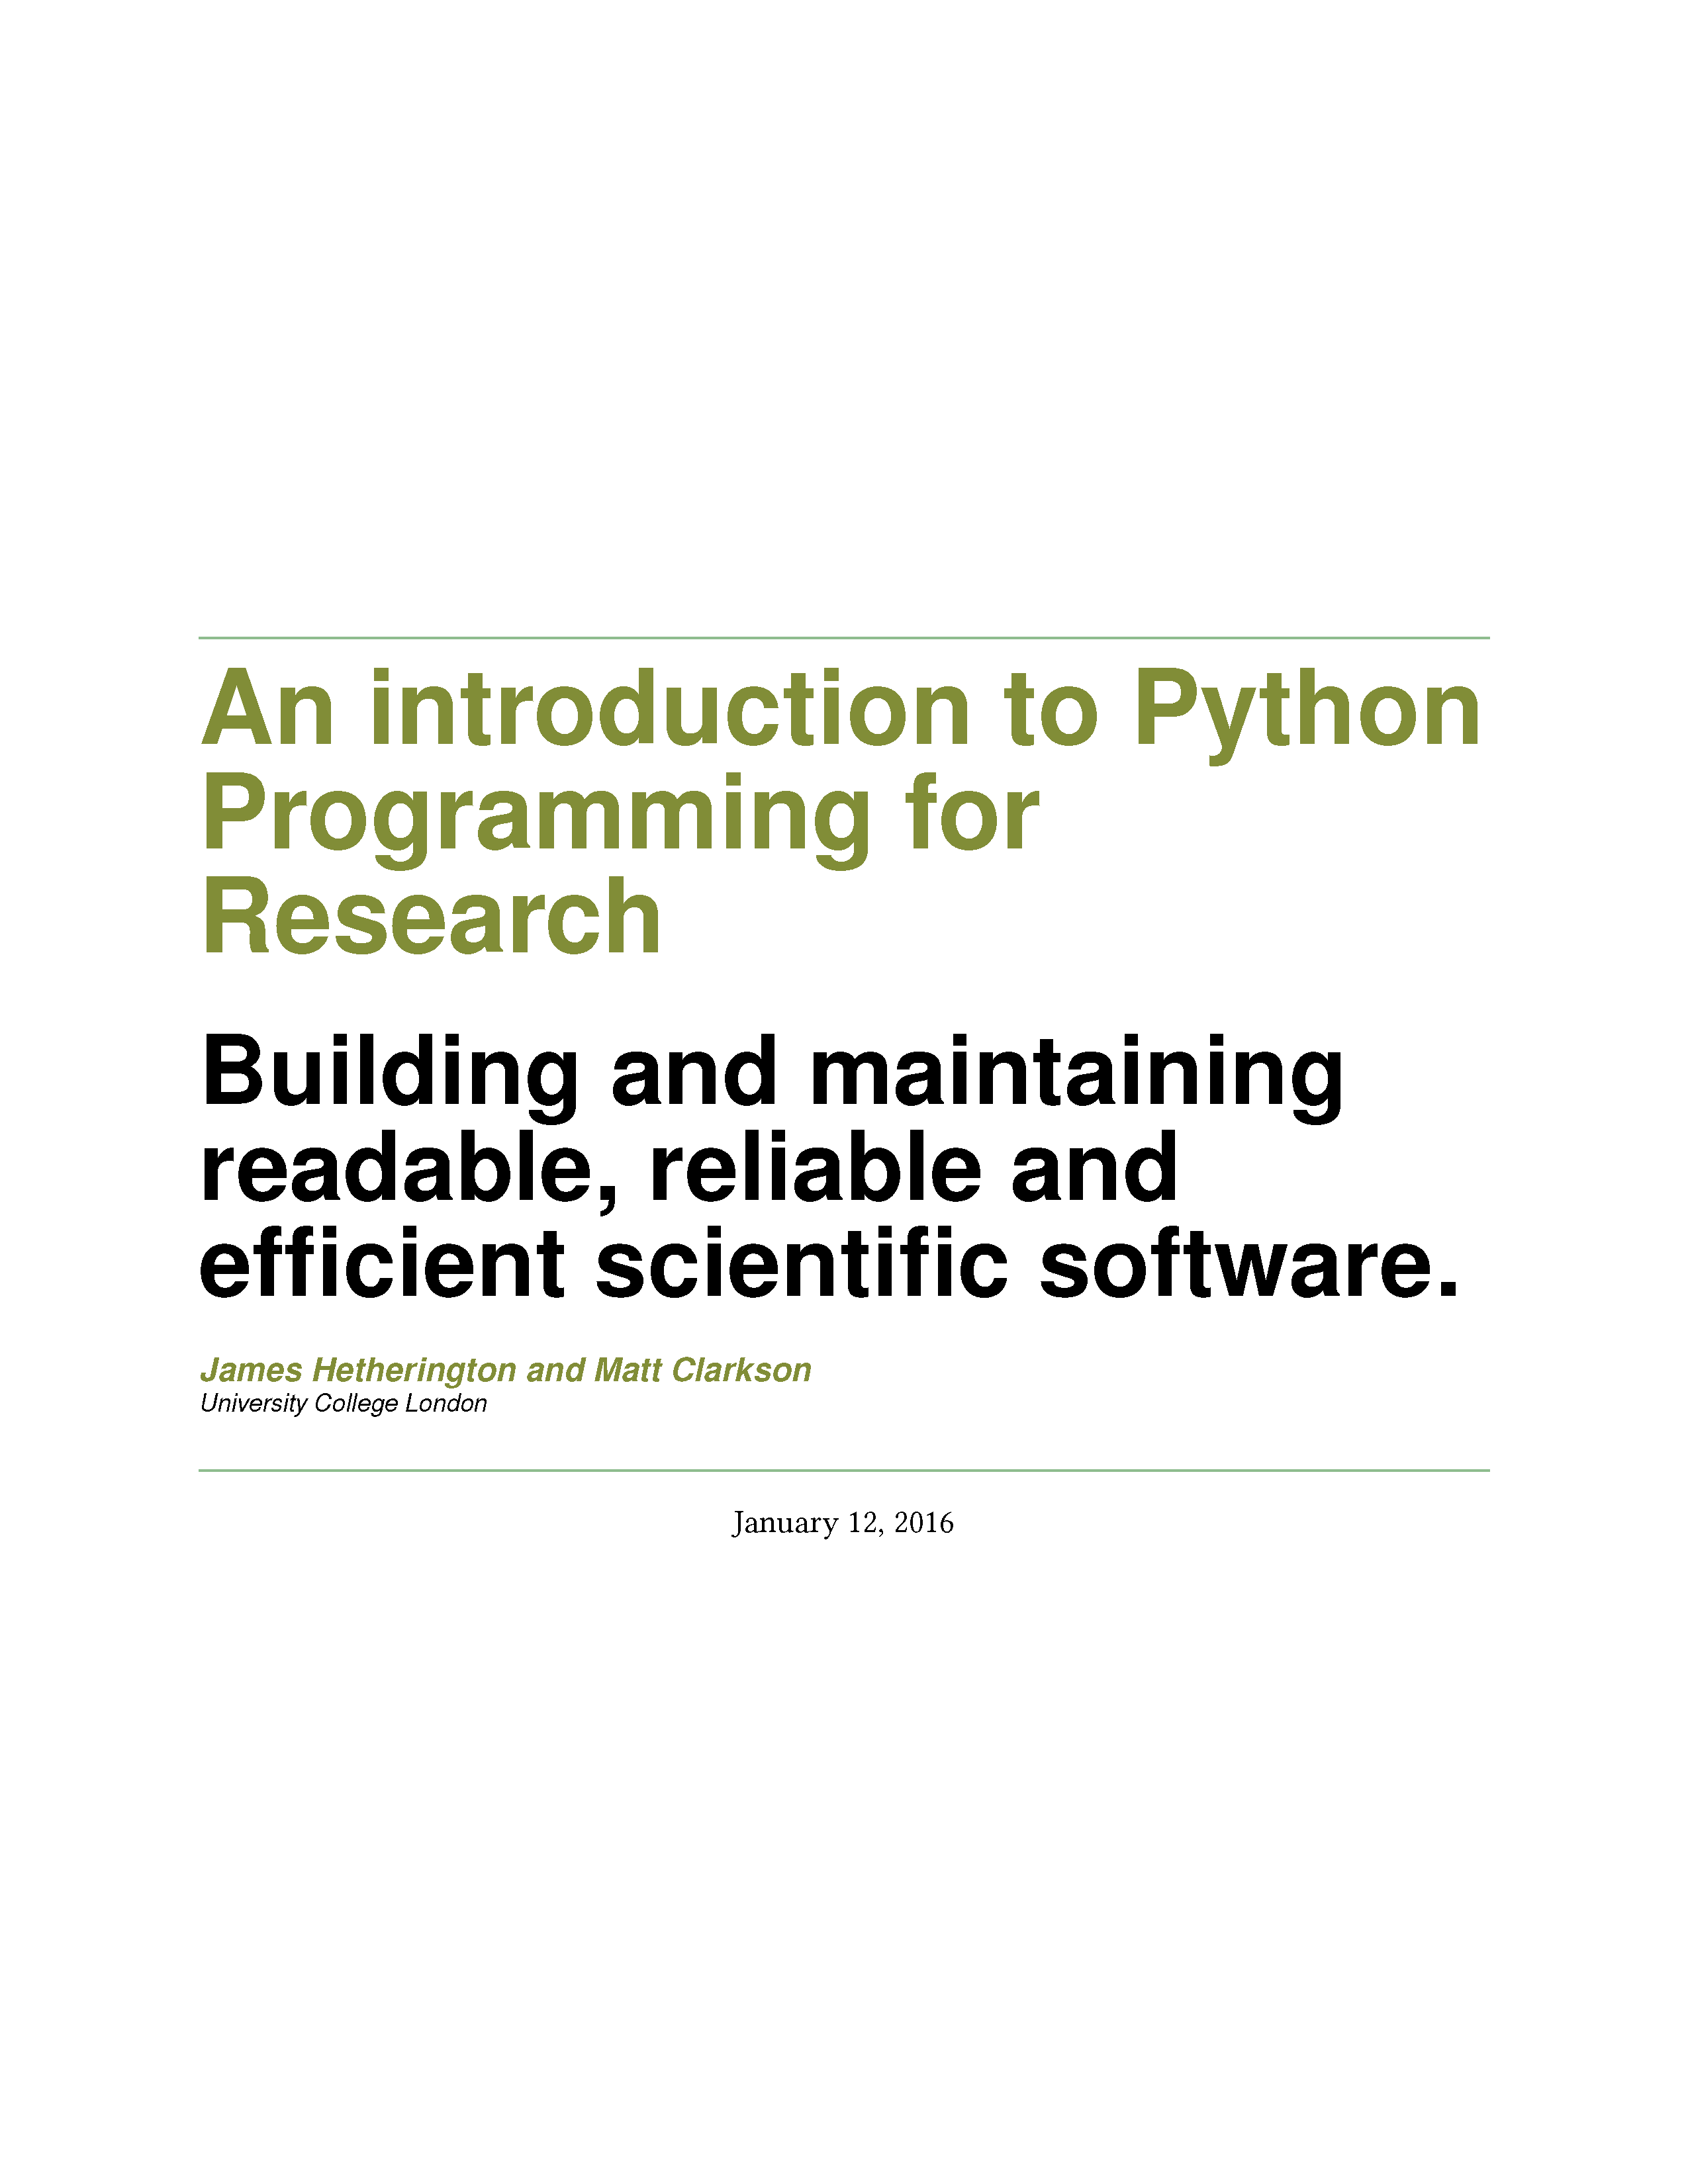 An introduction to Python Programming for Research